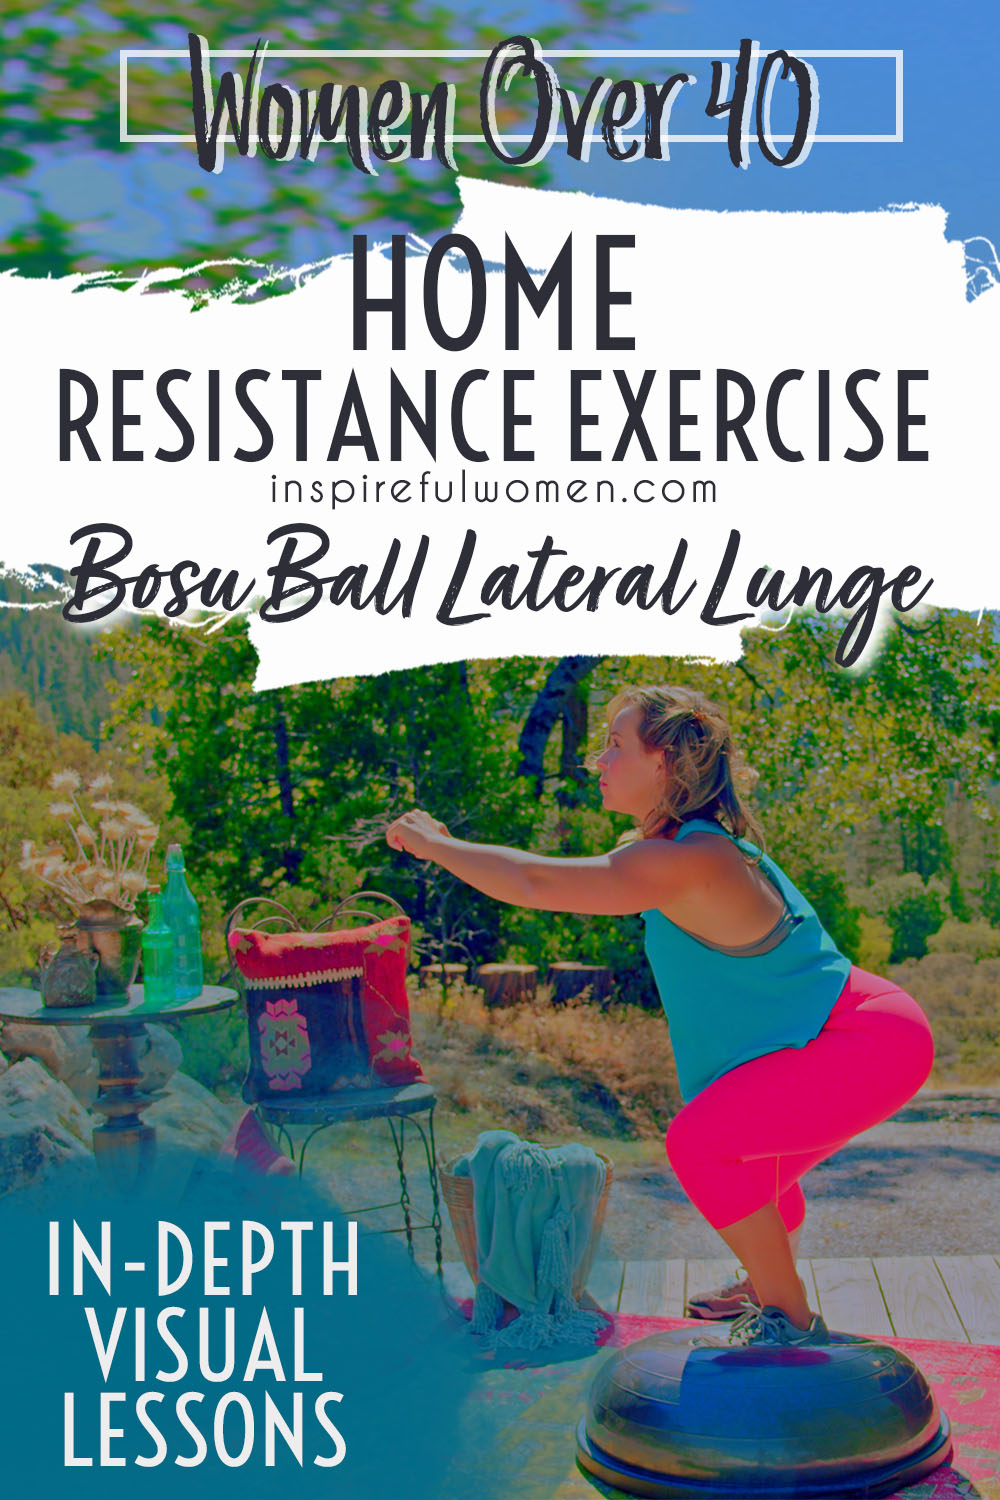 bosu-side-lateral-lunge-squat-alternative-inner-thigh-quadriceps-adductor-glutes-exercise-women-40+